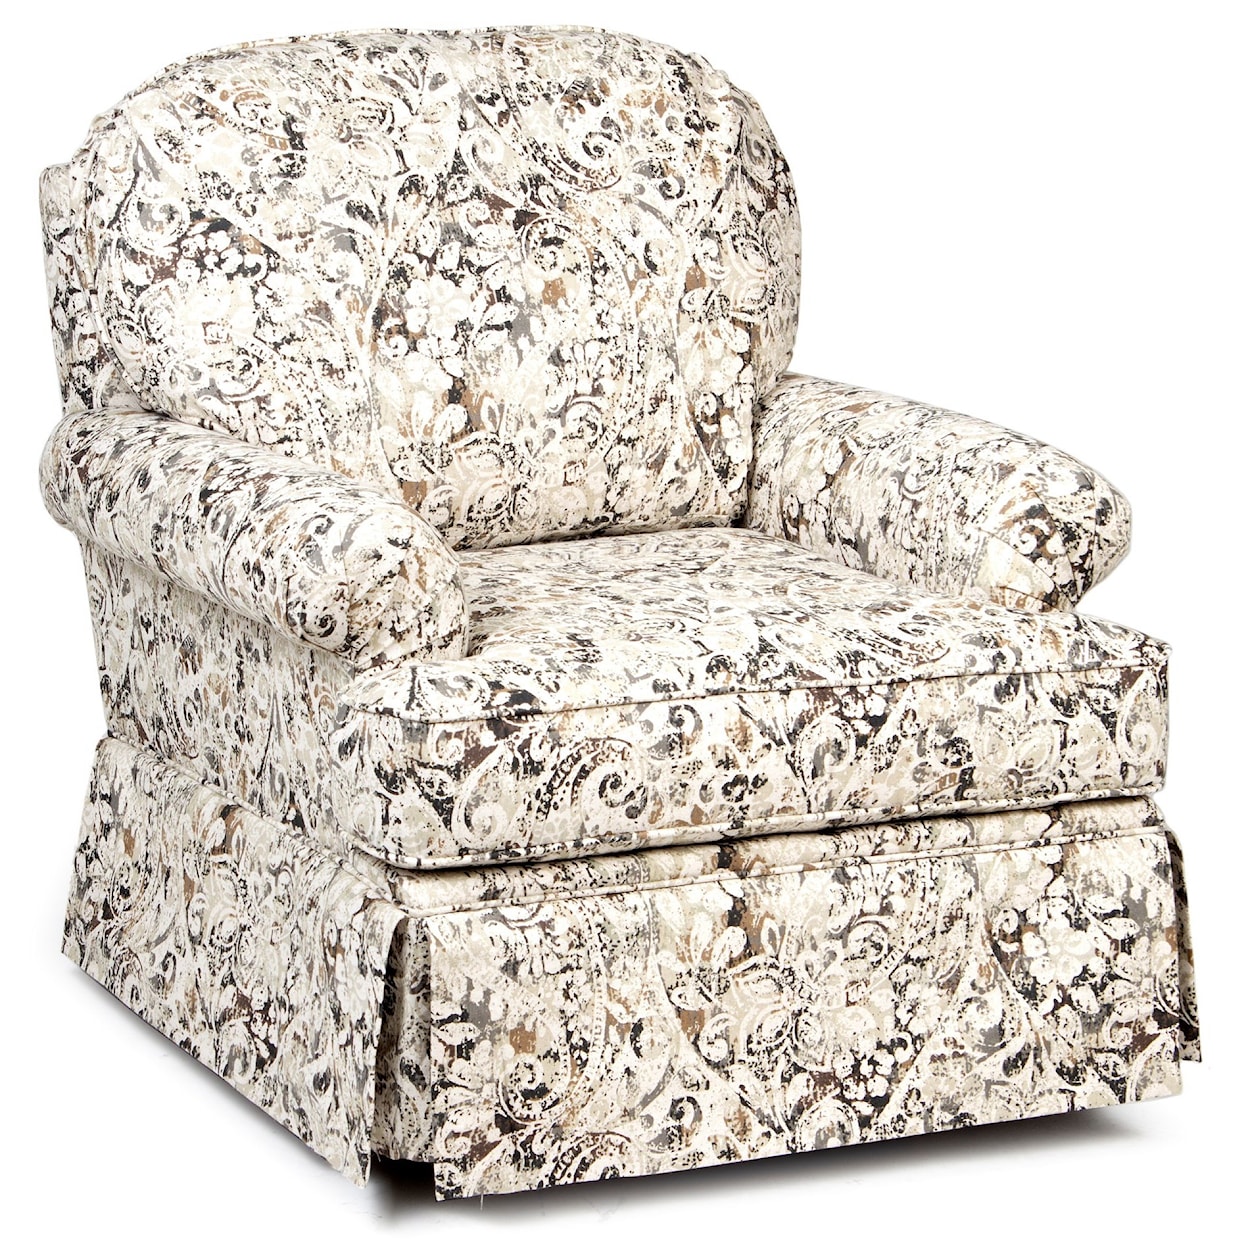 Chairs America Accent Chairs and Ottomans Swivel Glider